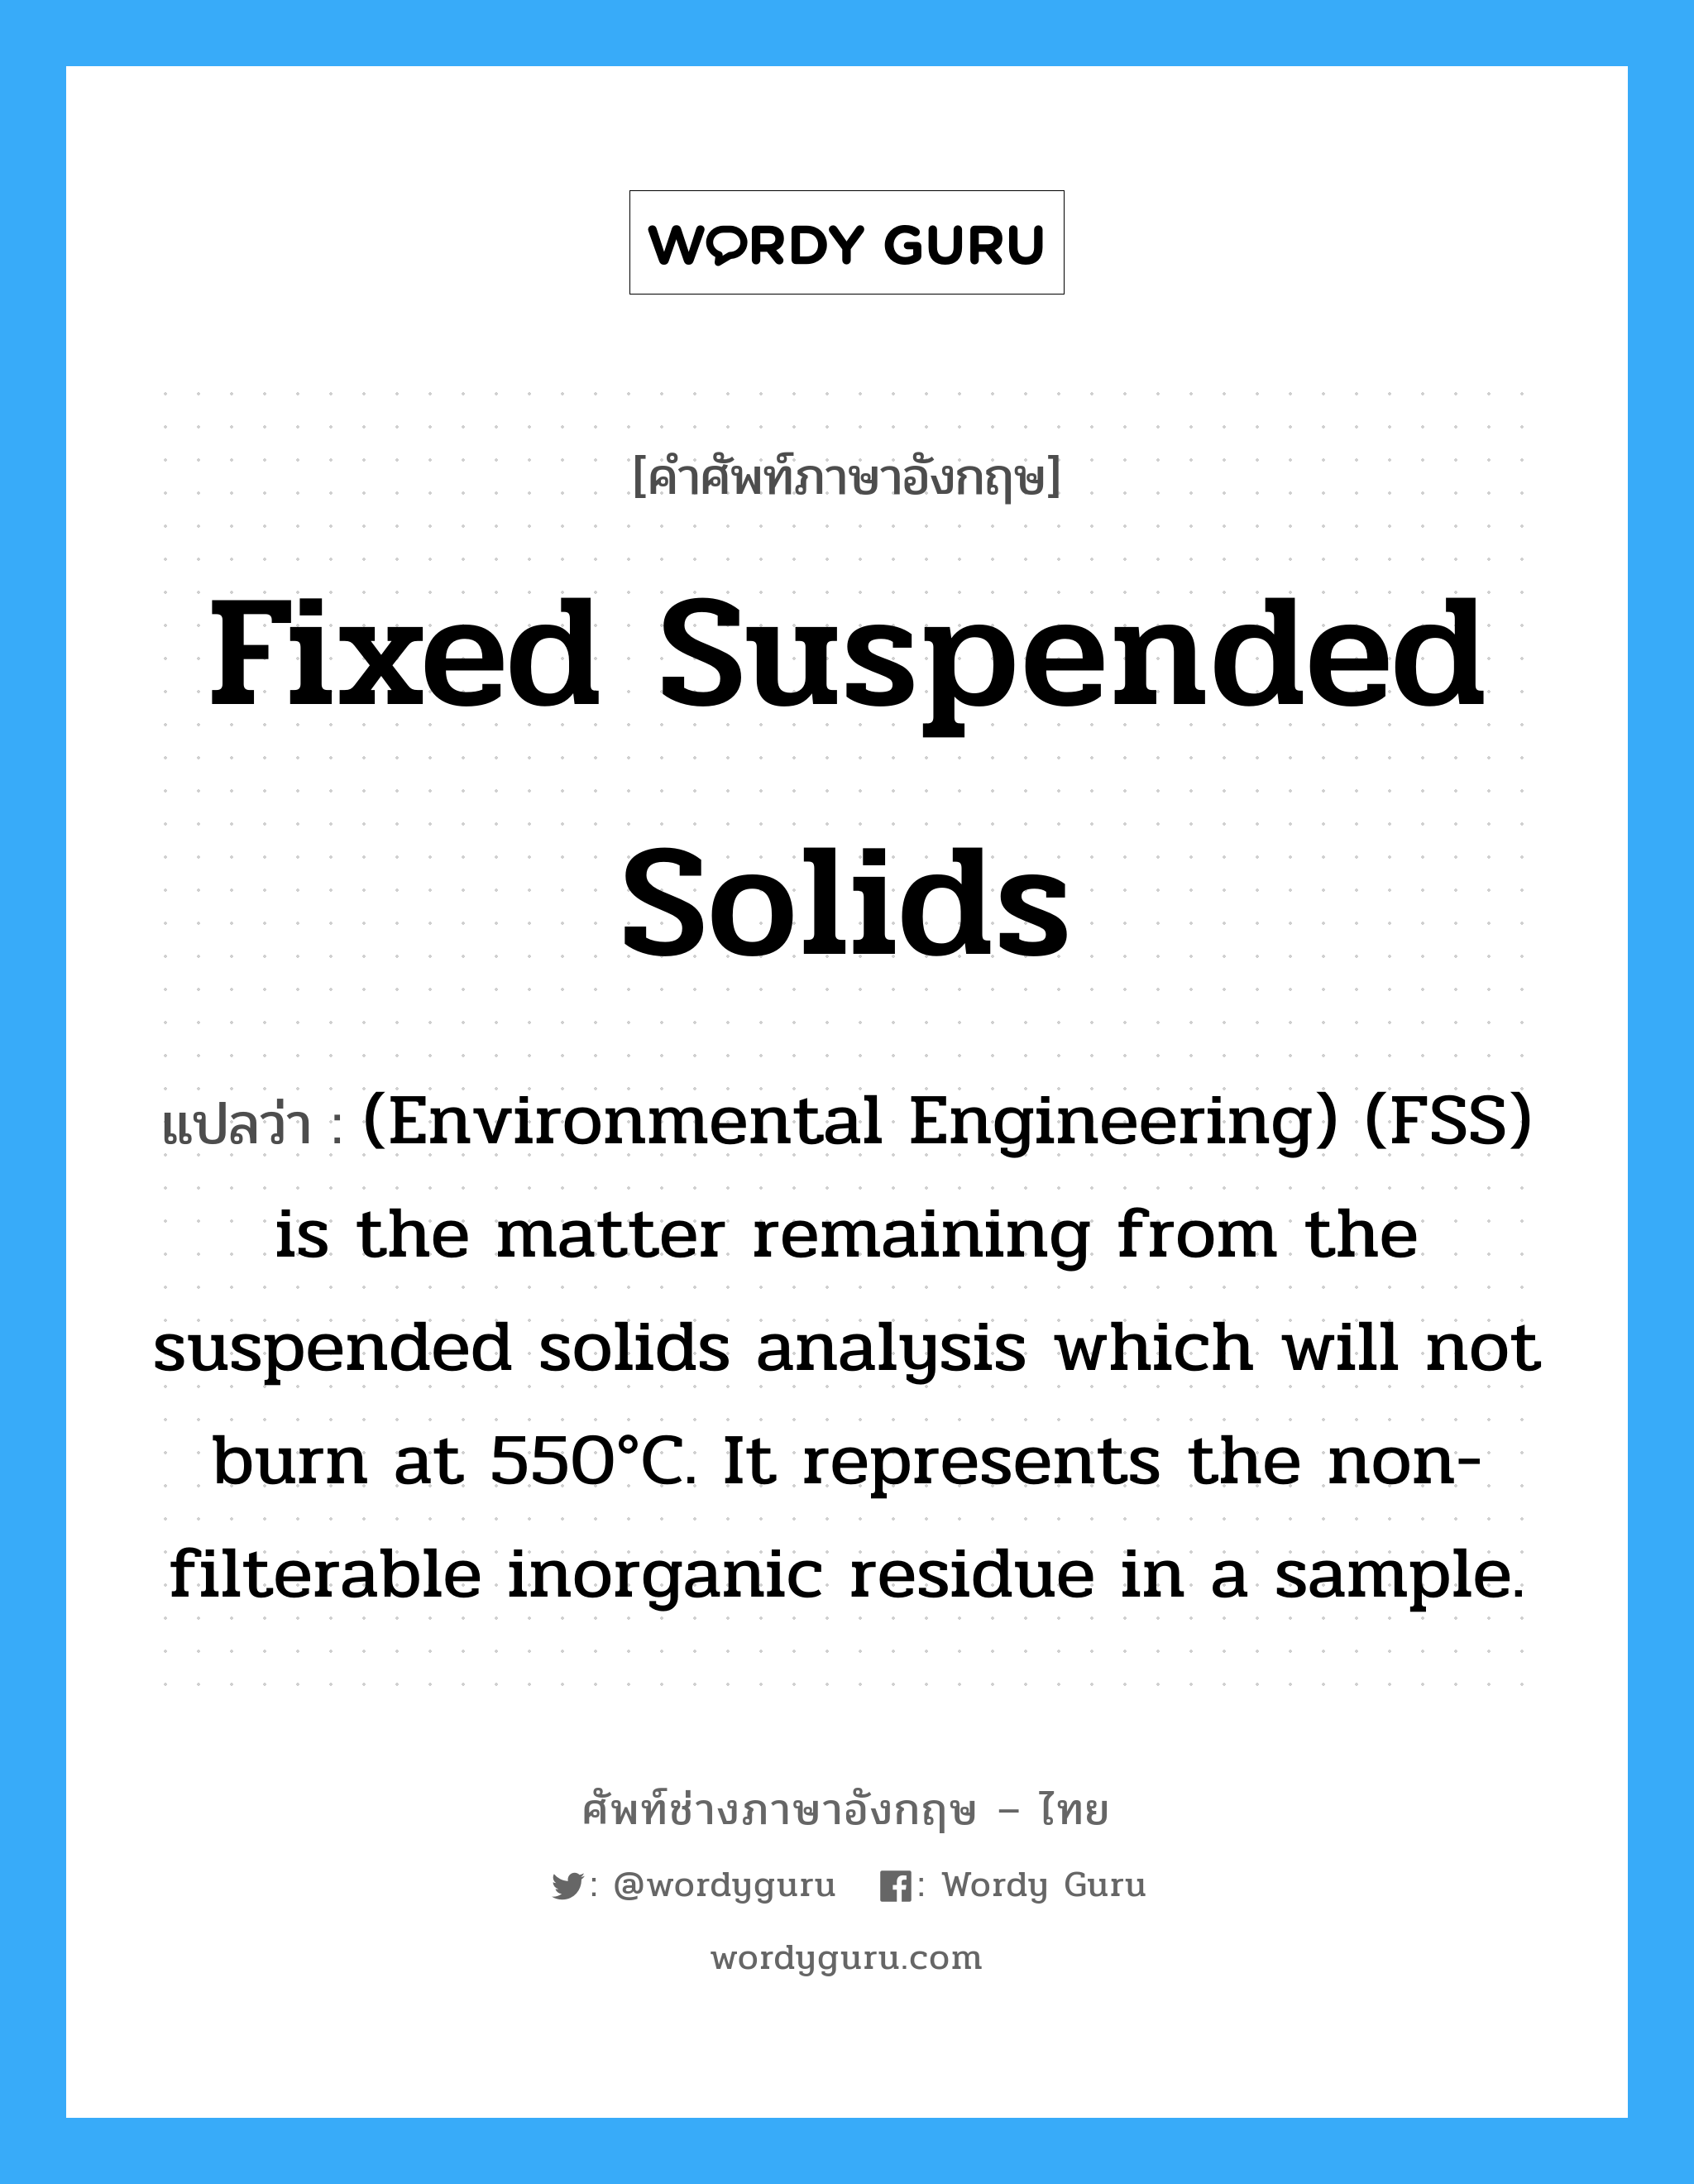 Fixed suspended solids แปลว่า?, คำศัพท์ช่างภาษาอังกฤษ - ไทย Fixed suspended solids คำศัพท์ภาษาอังกฤษ Fixed suspended solids แปลว่า (Environmental Engineering) (FSS) is the matter remaining from the suspended solids analysis which will not burn at 550°C. It represents the non-filterable inorganic residue in a sample.